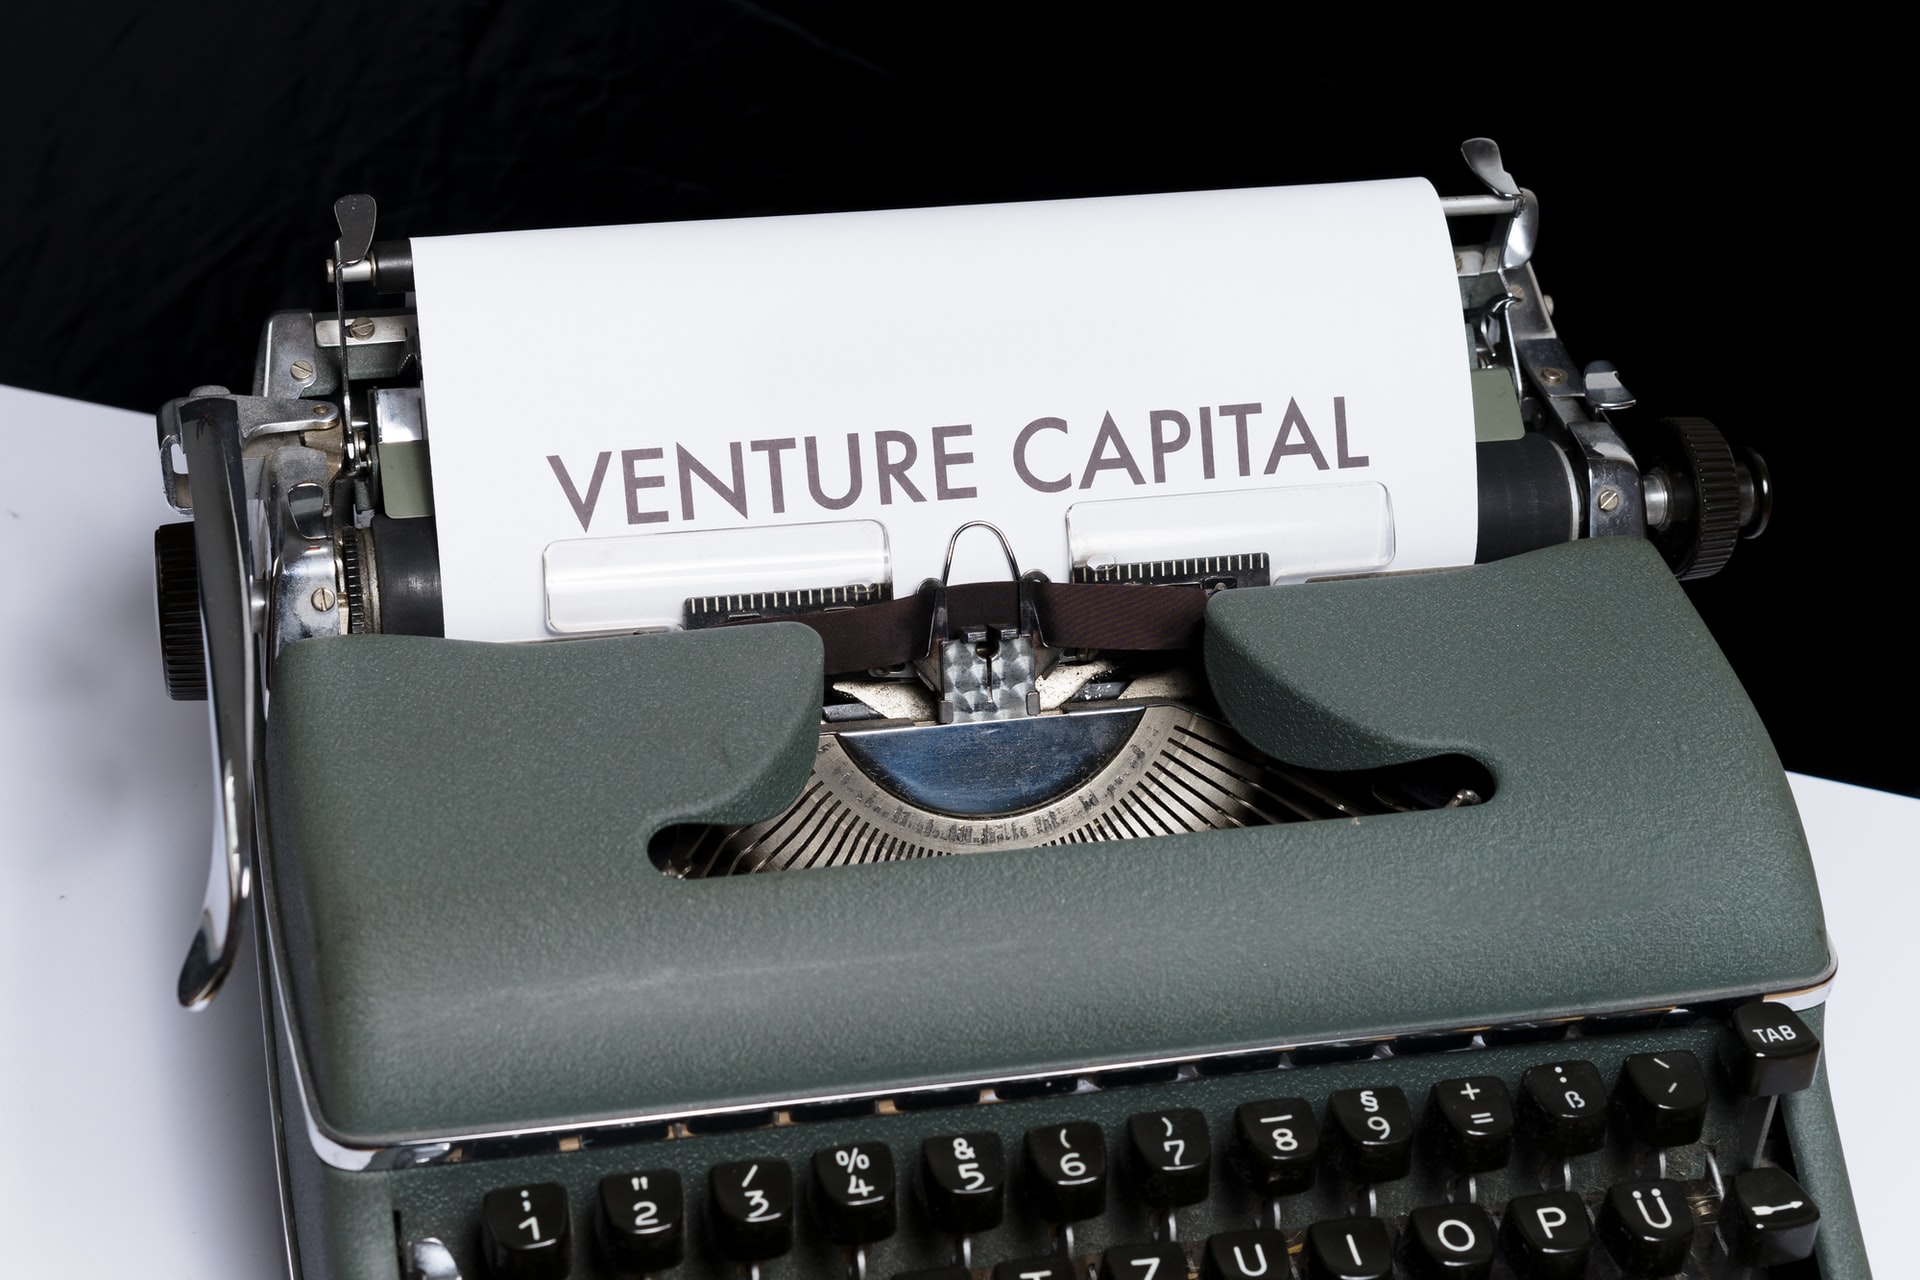 cash-rich-funding-flows-in-fast-for-start-ups-12-1-billion-investment-by-vcs-in-first-6-months-of-year